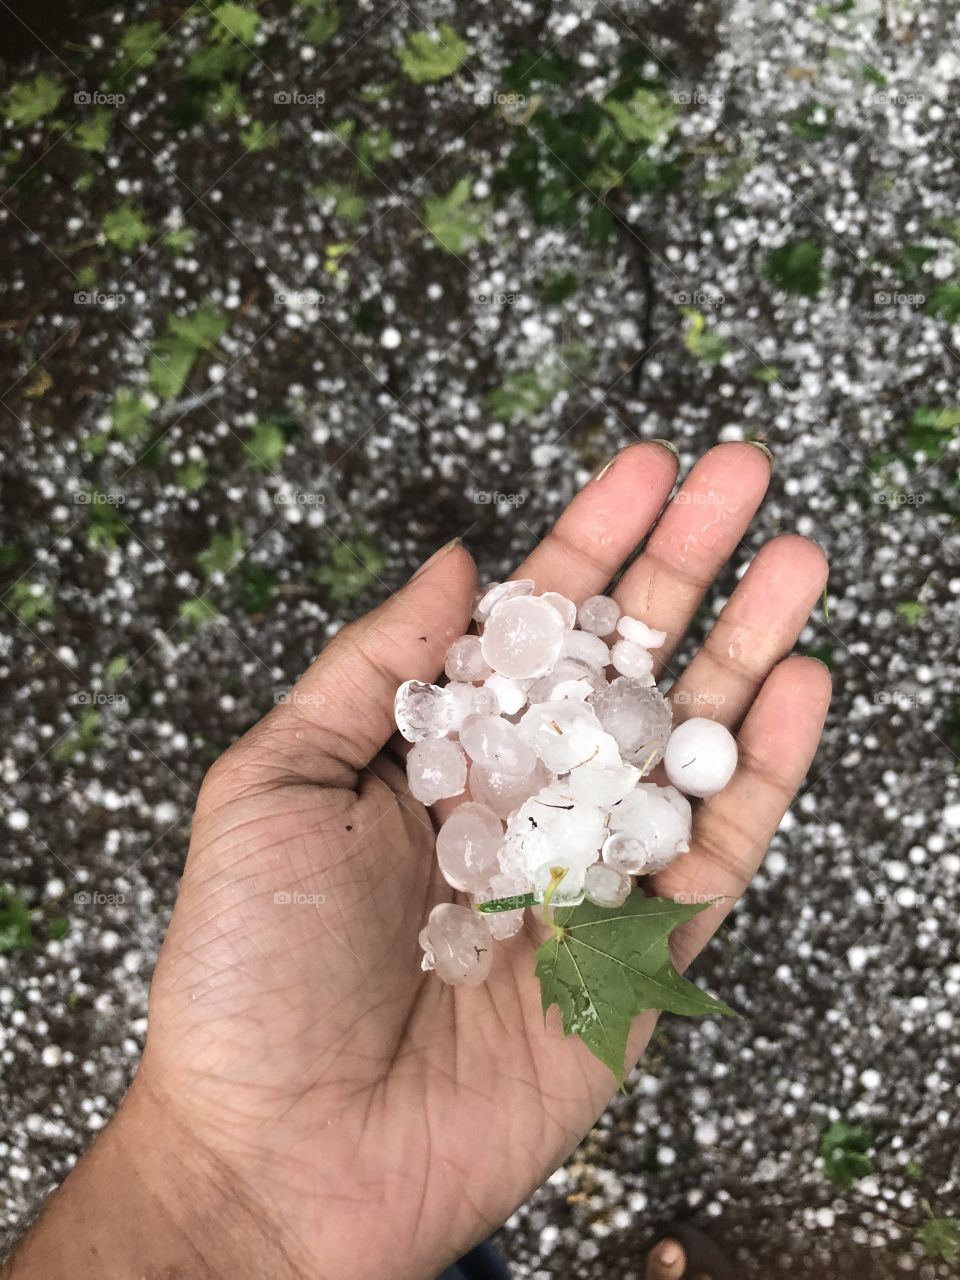 Fun with some ice balls after a hail storm! Ice and a crushed leaf in hand.